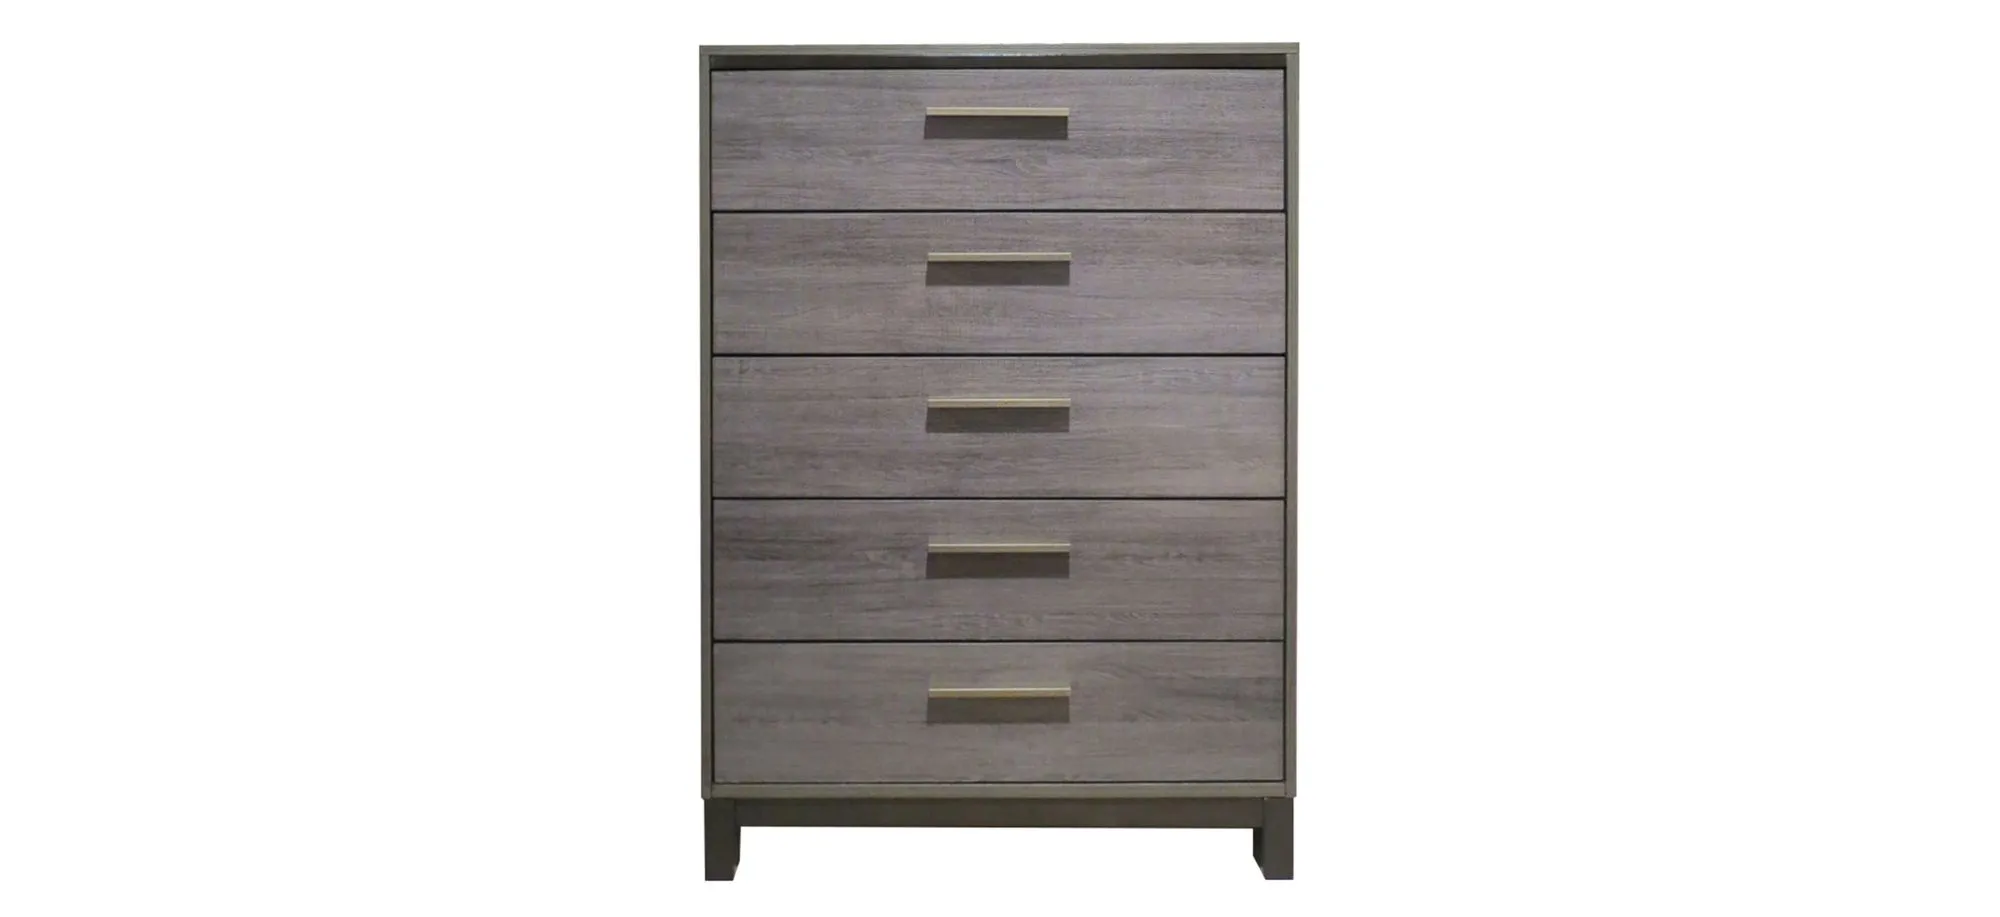 Solace Bedroom Chest in Antique gray and dark brown by Homelegance